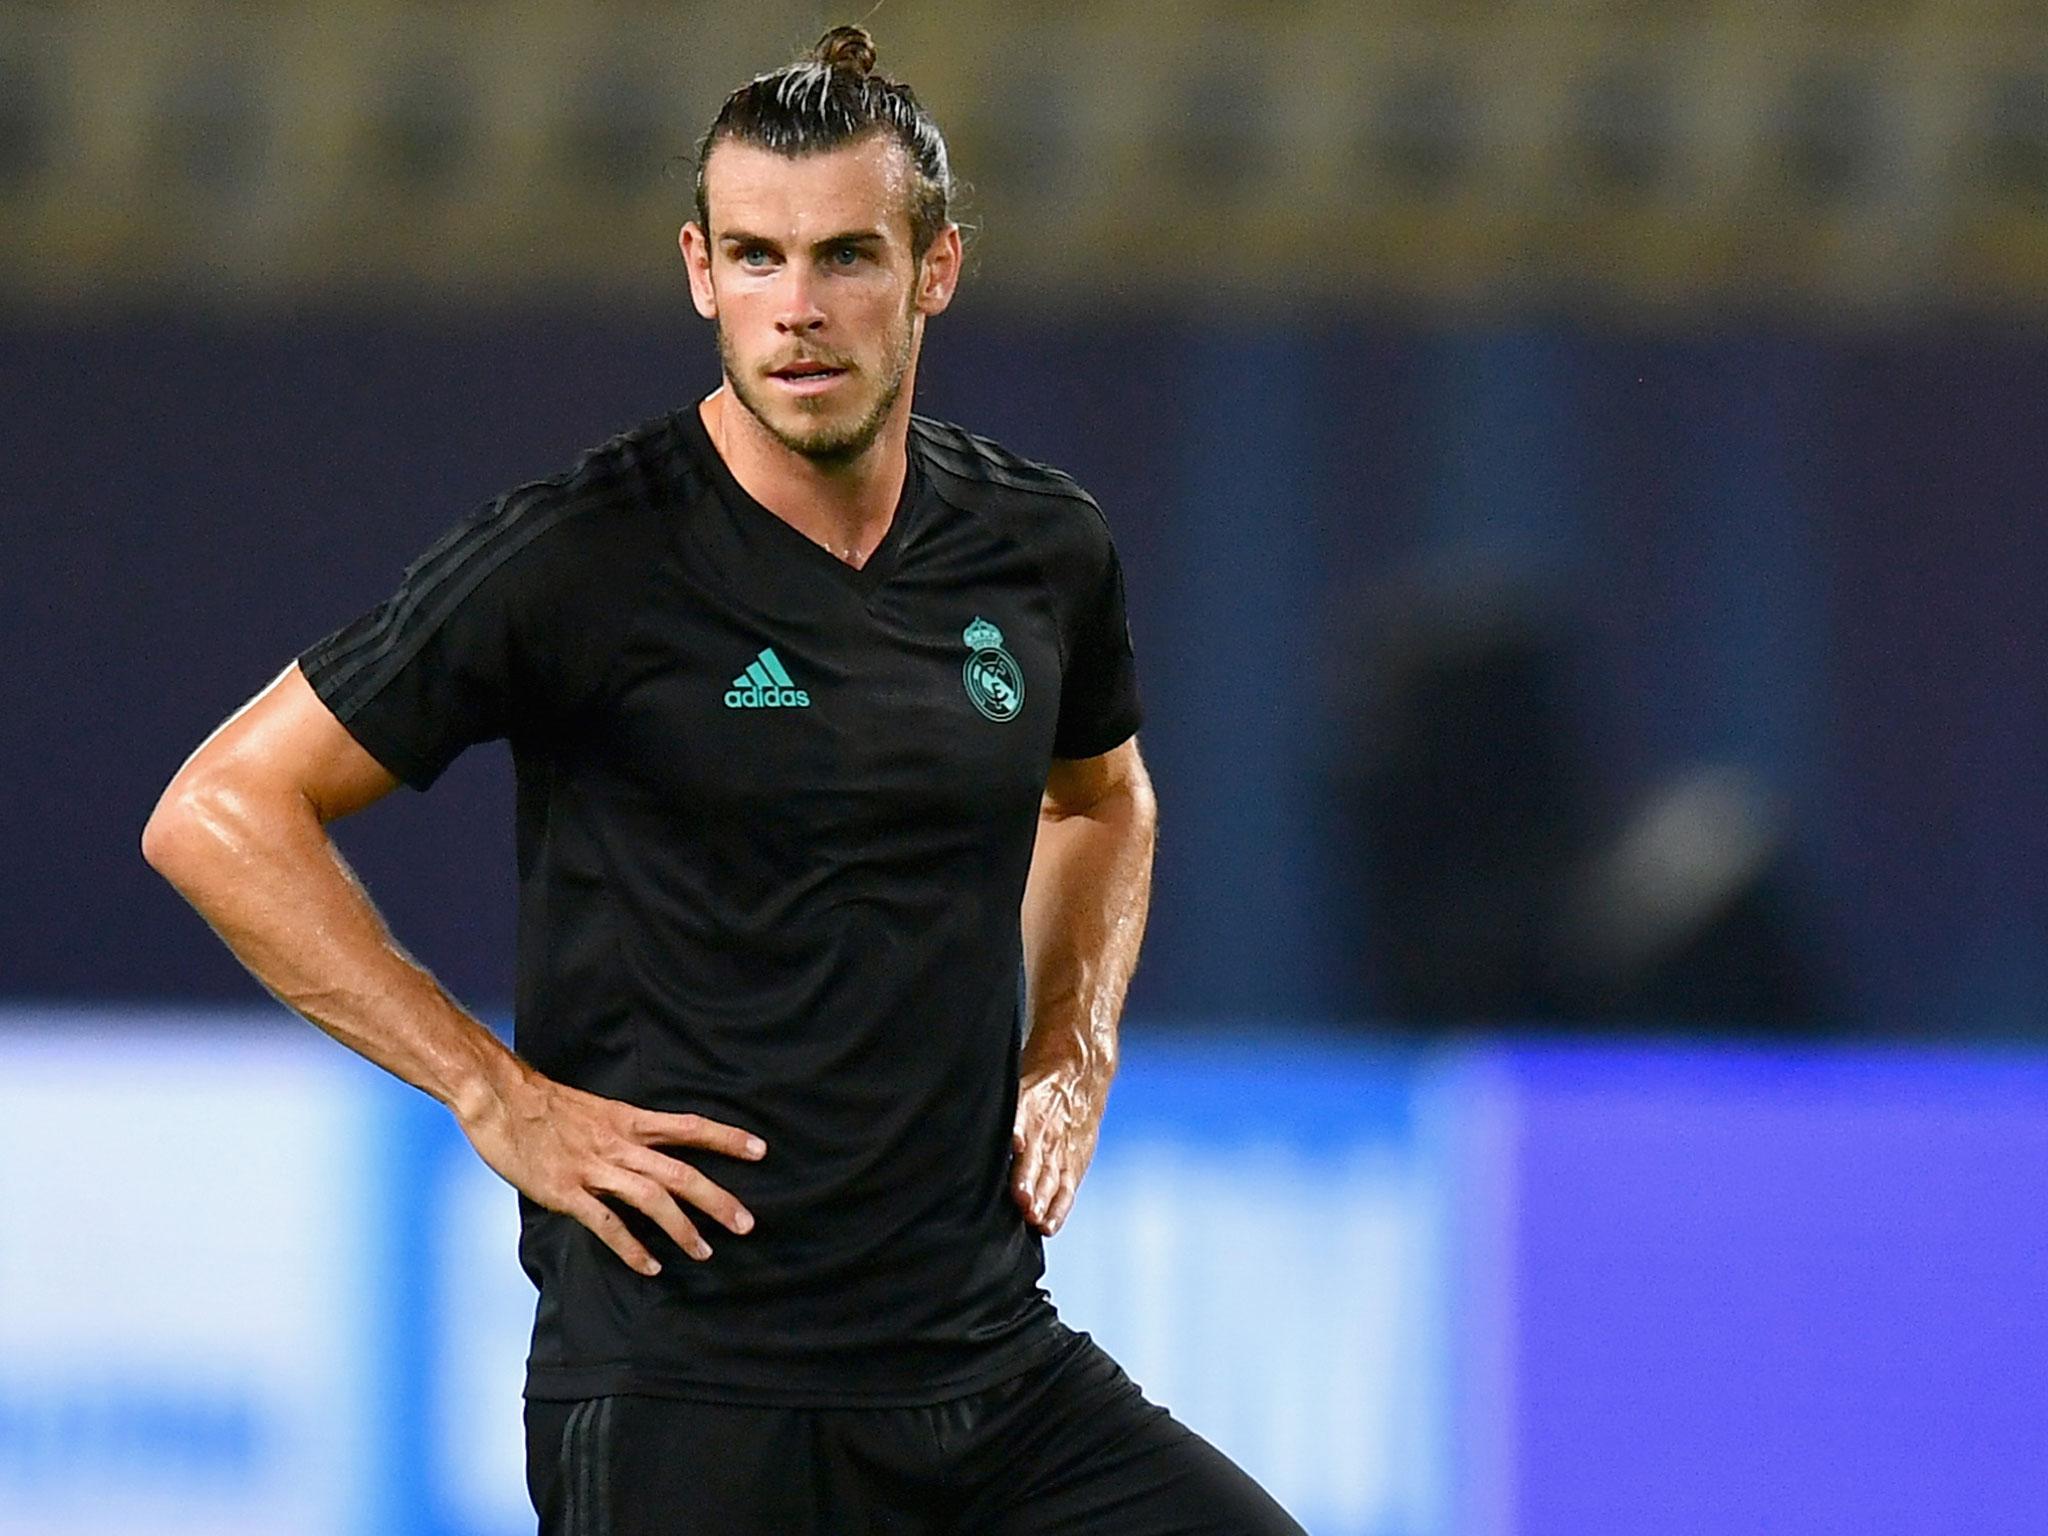 &#13;
Bale has no plans to leave Real Madrid &#13;